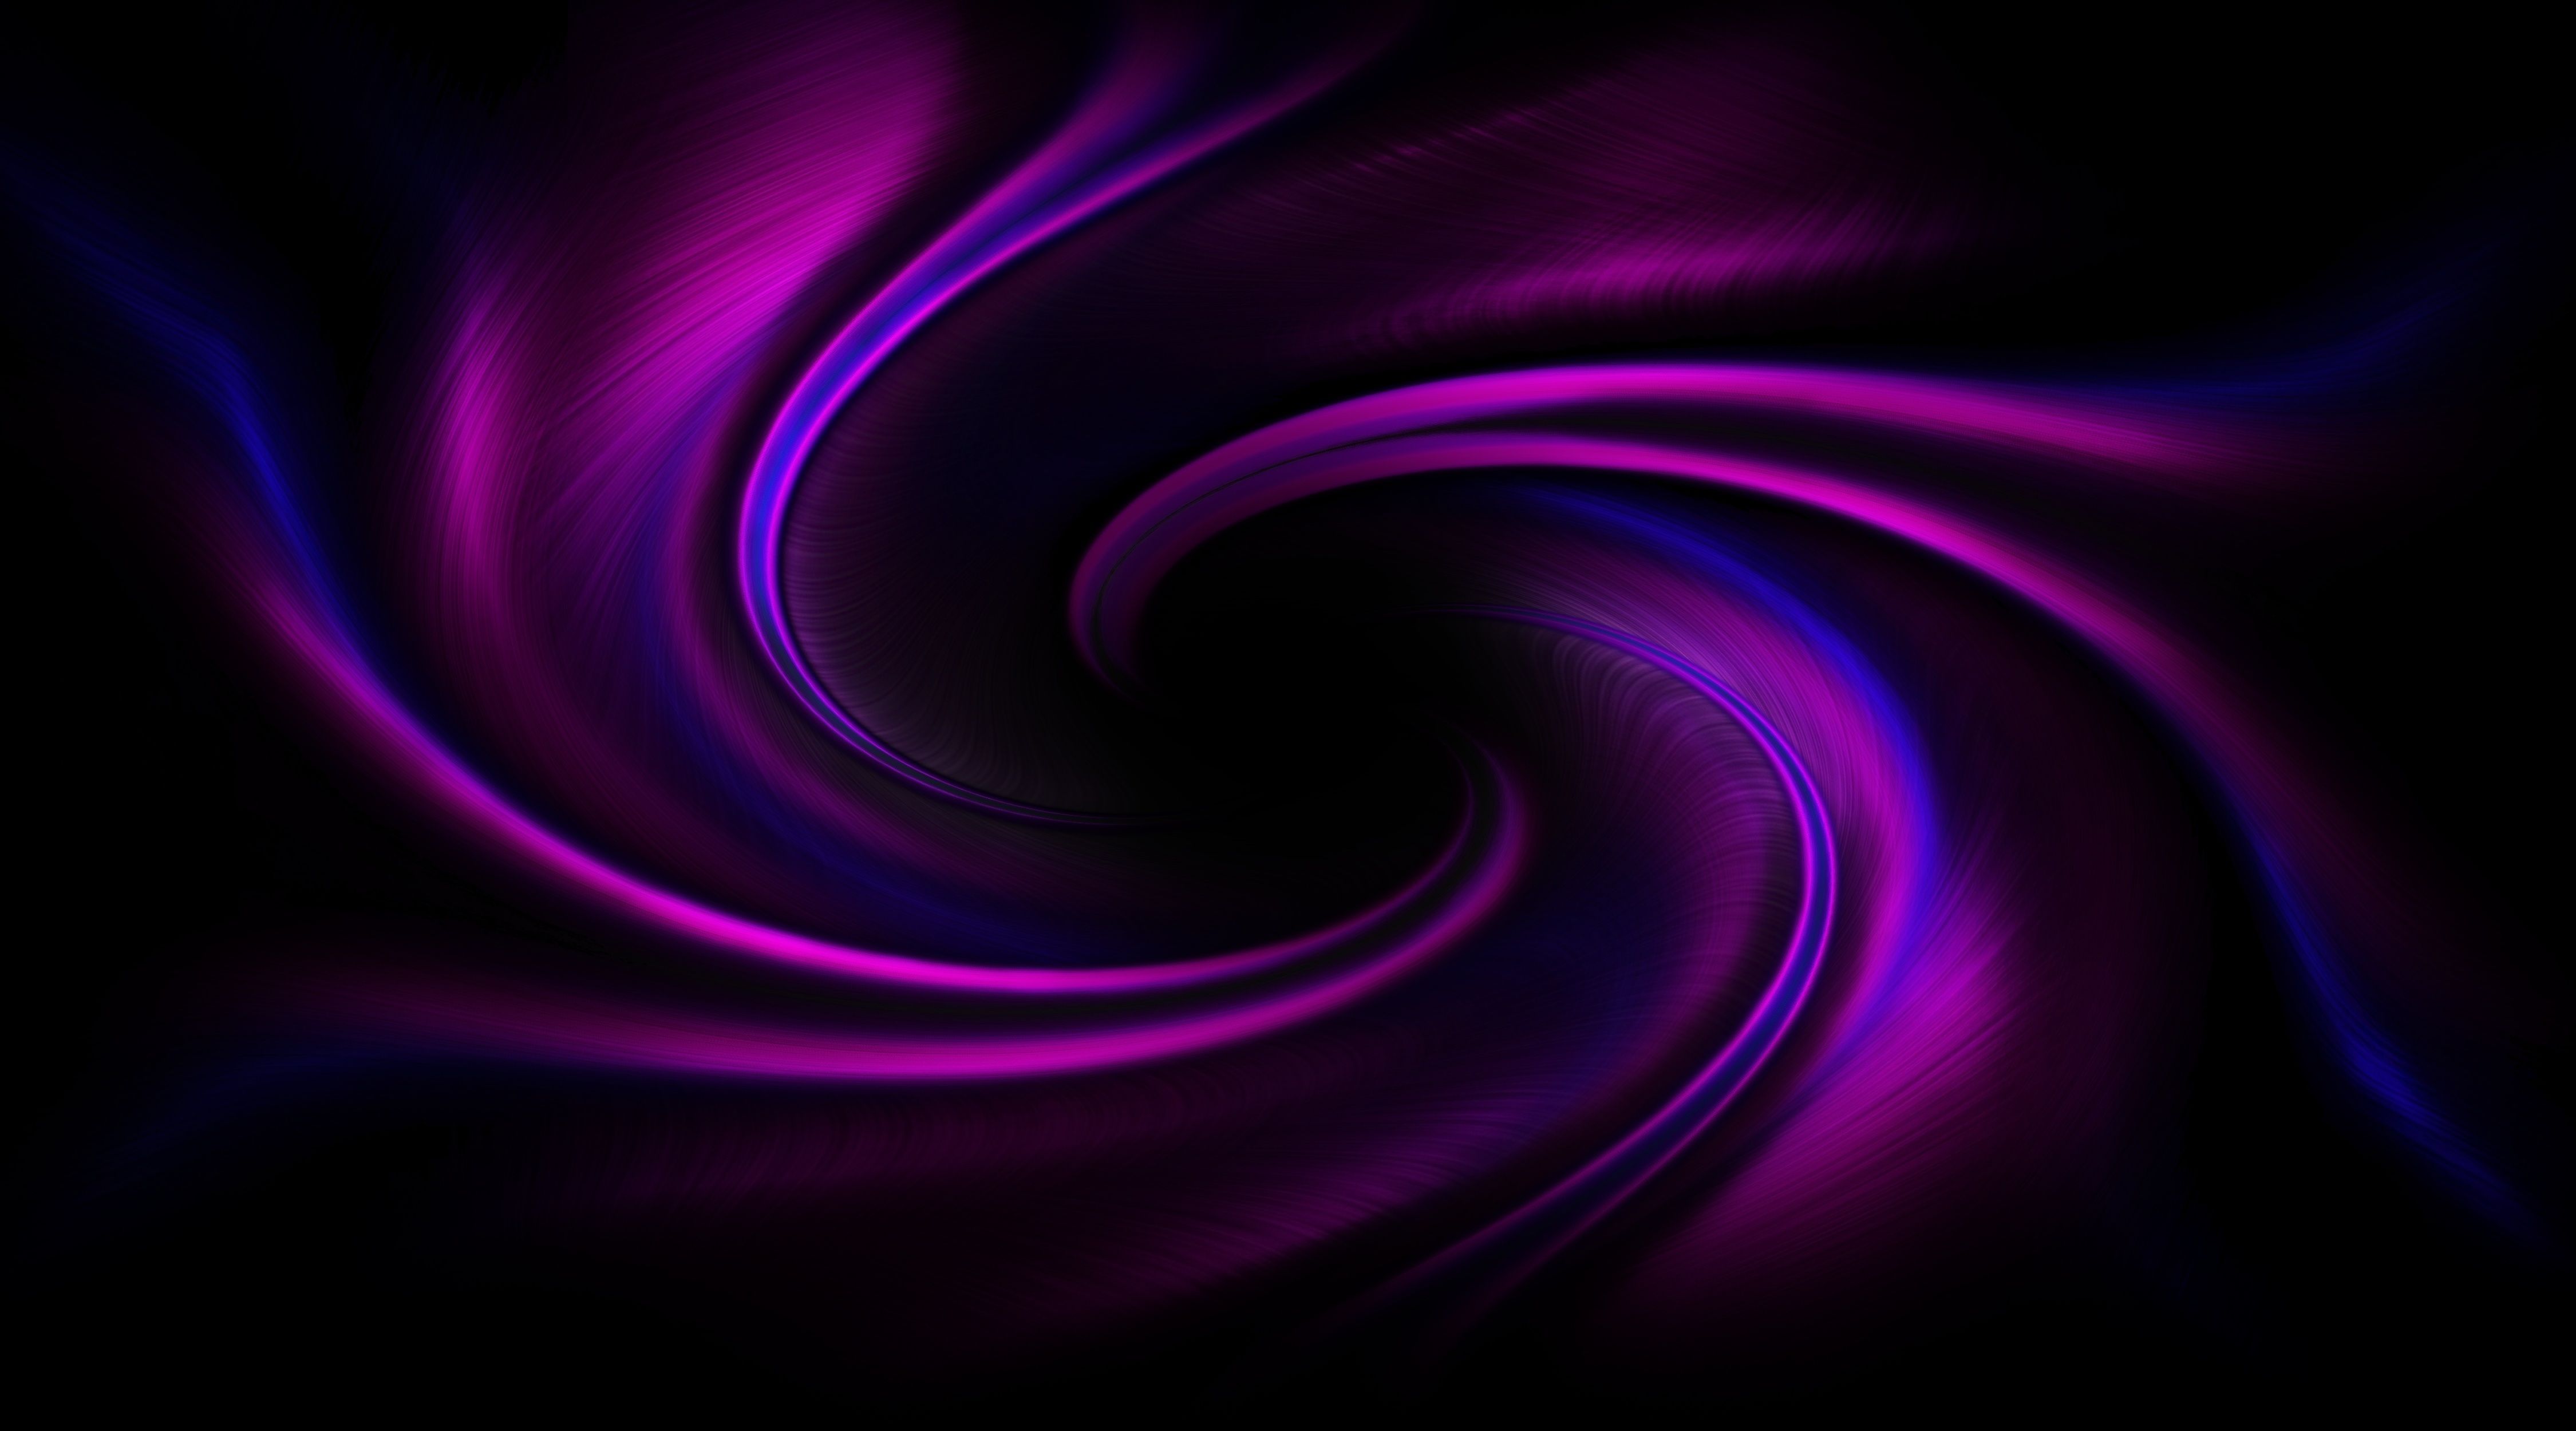 Purple and blue abstract patterns on a black background Desktop wallpaper 1024x600